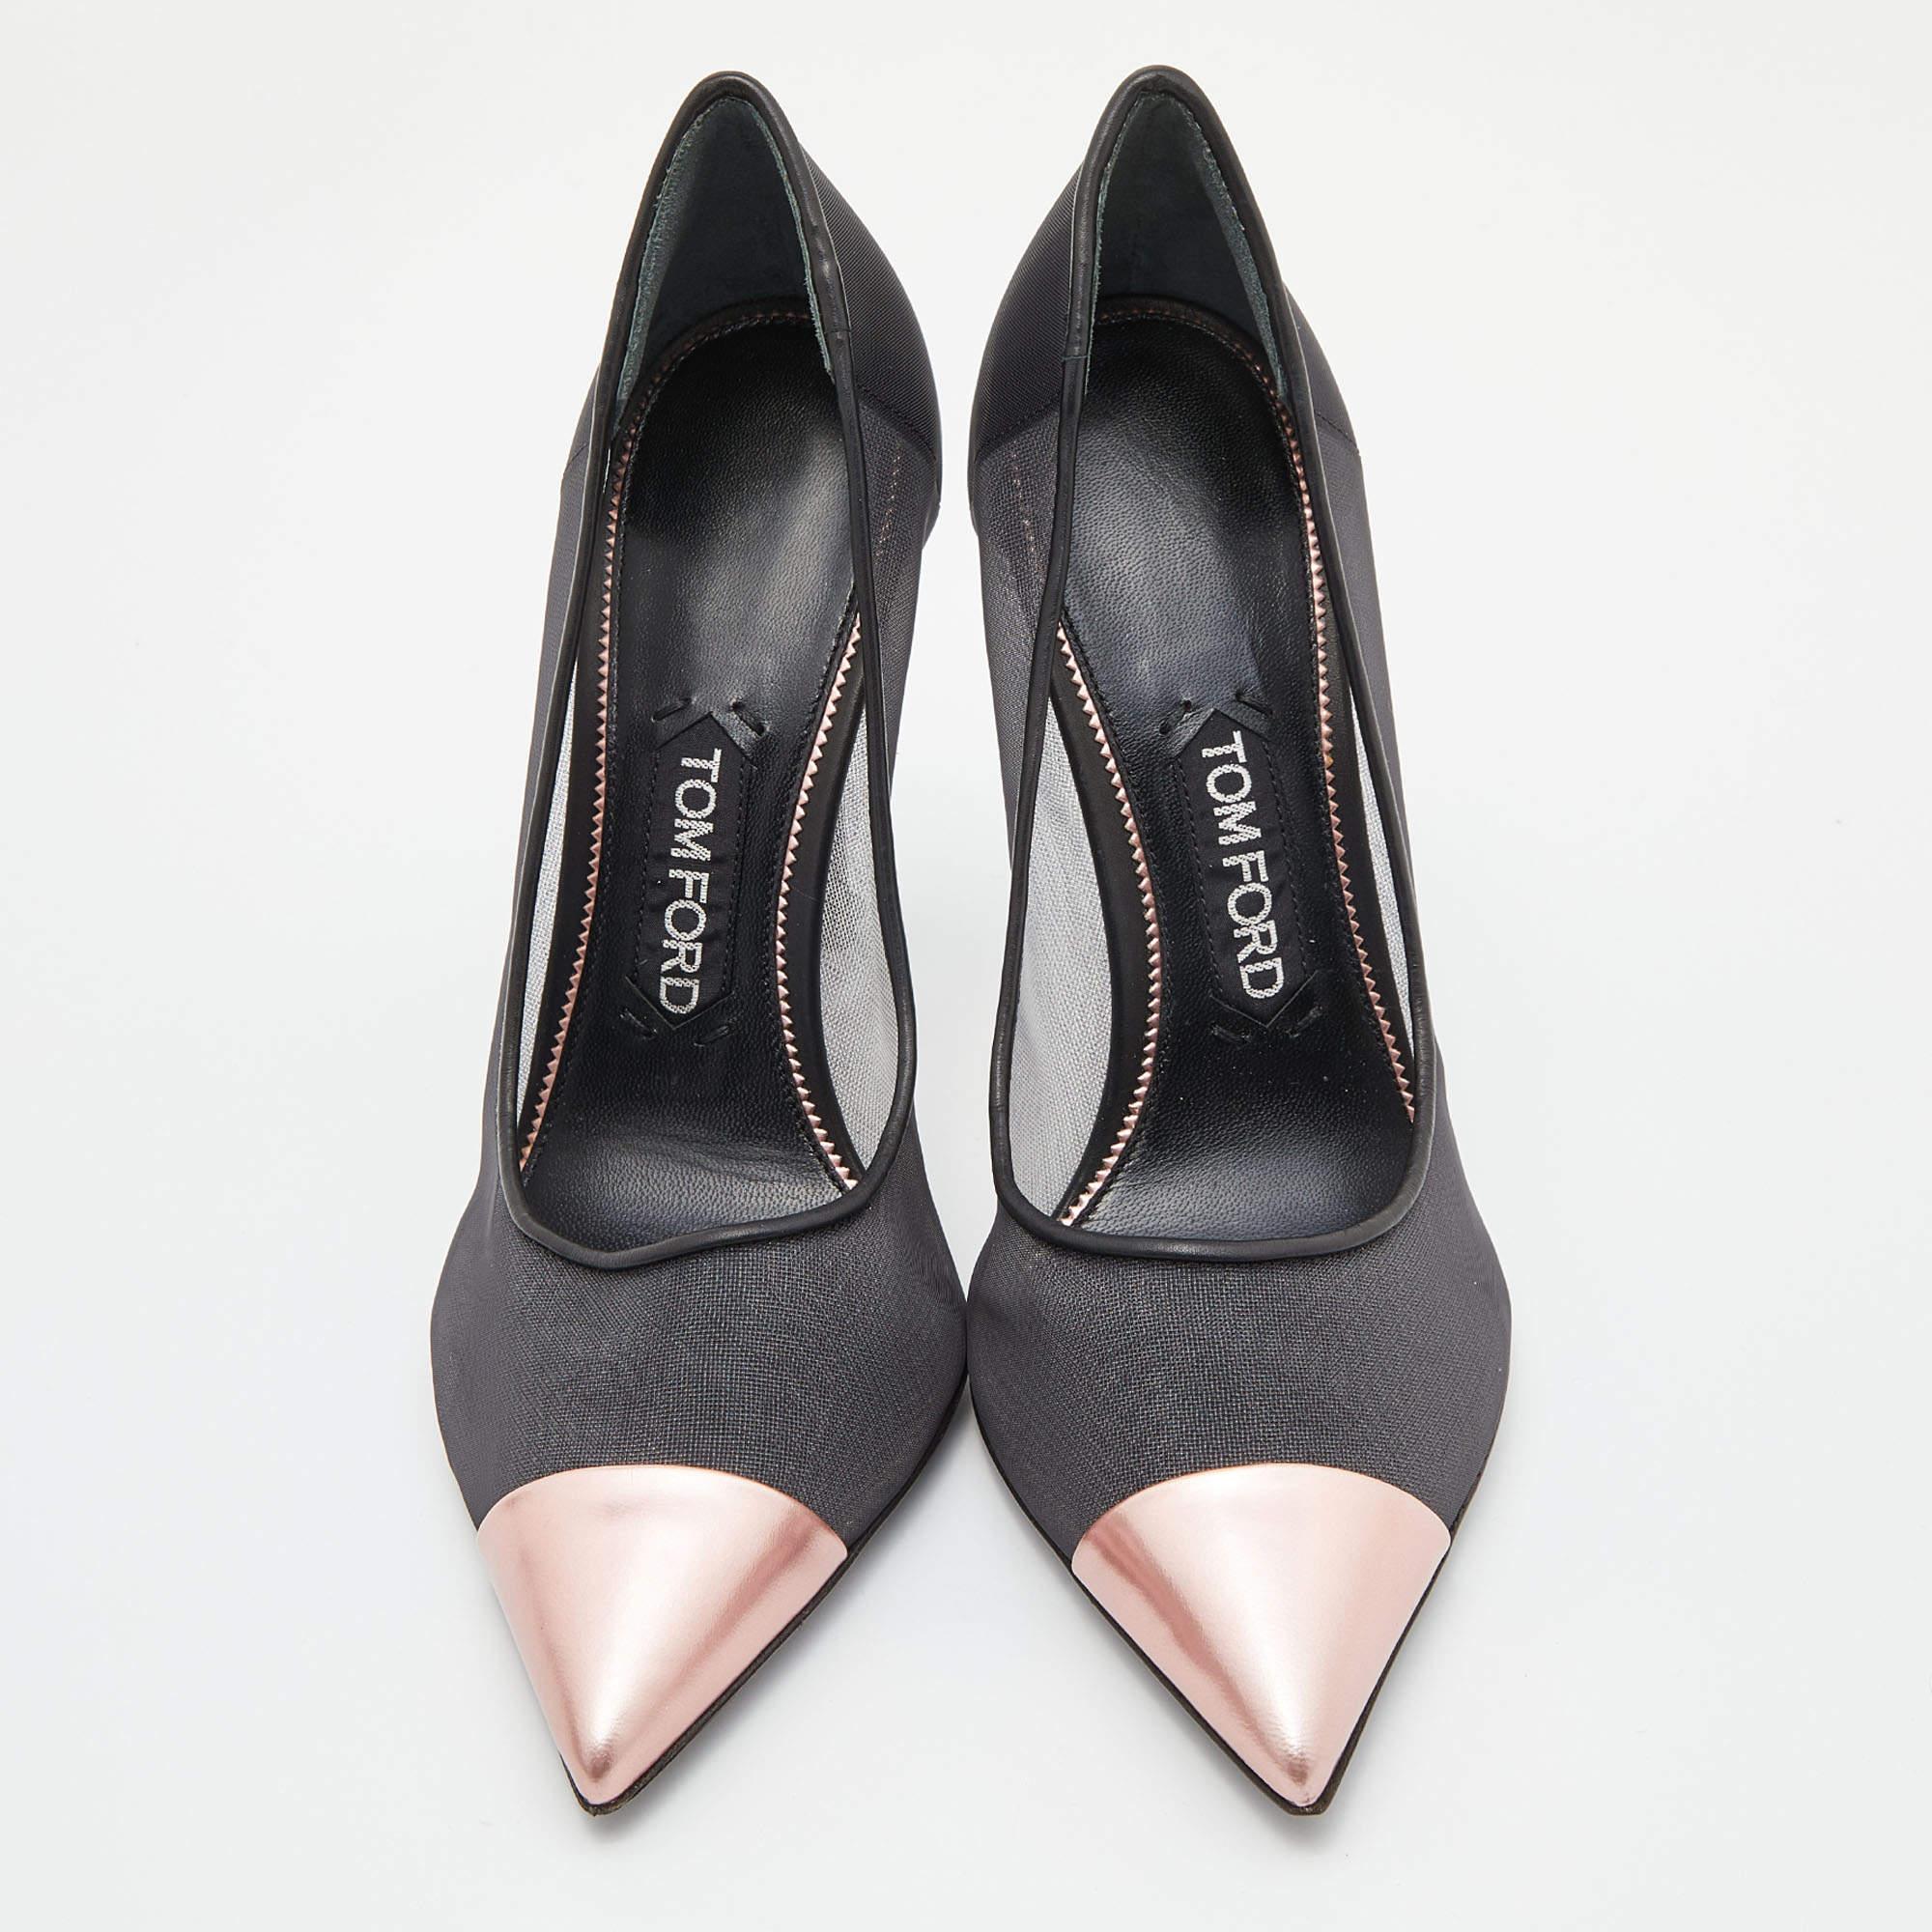 These pumps from Tom Ford are meant for seasons of comfort and style. Crafted from mesh & leather, they feature an elegant shape with pointed toes and 11 cm heels. ​These pumps are a must-have

Includes: Original Dustbag, Extra Heel Tips

